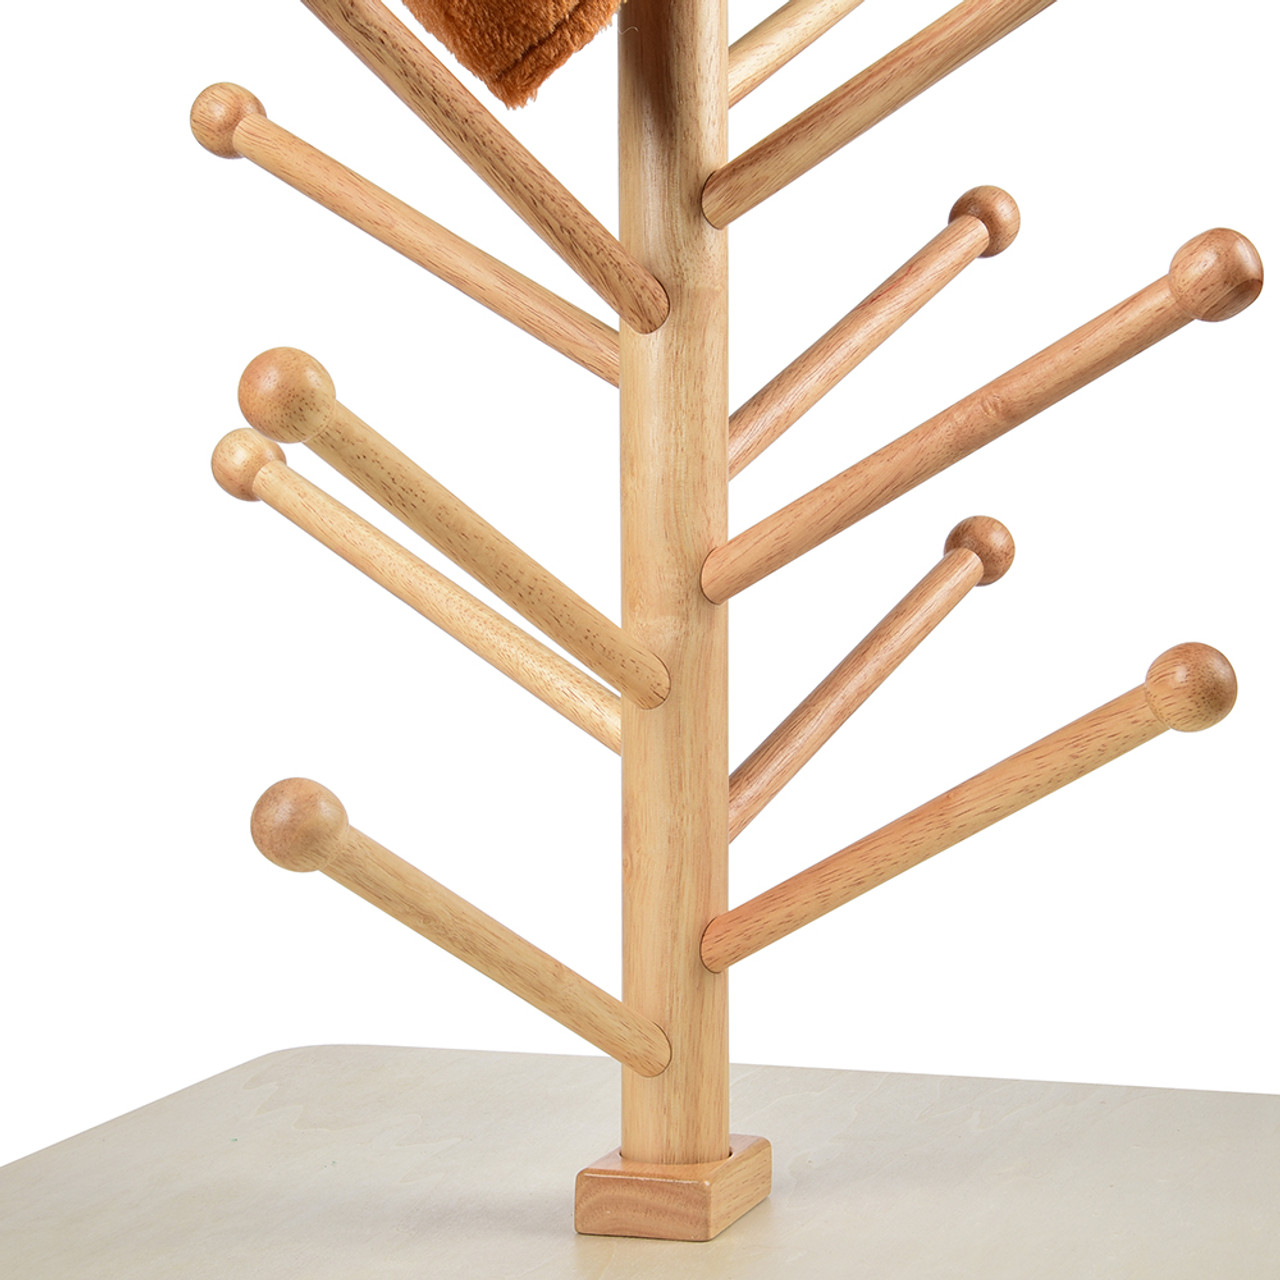 Wooden Puppet Stand,16L x 6W x 16H